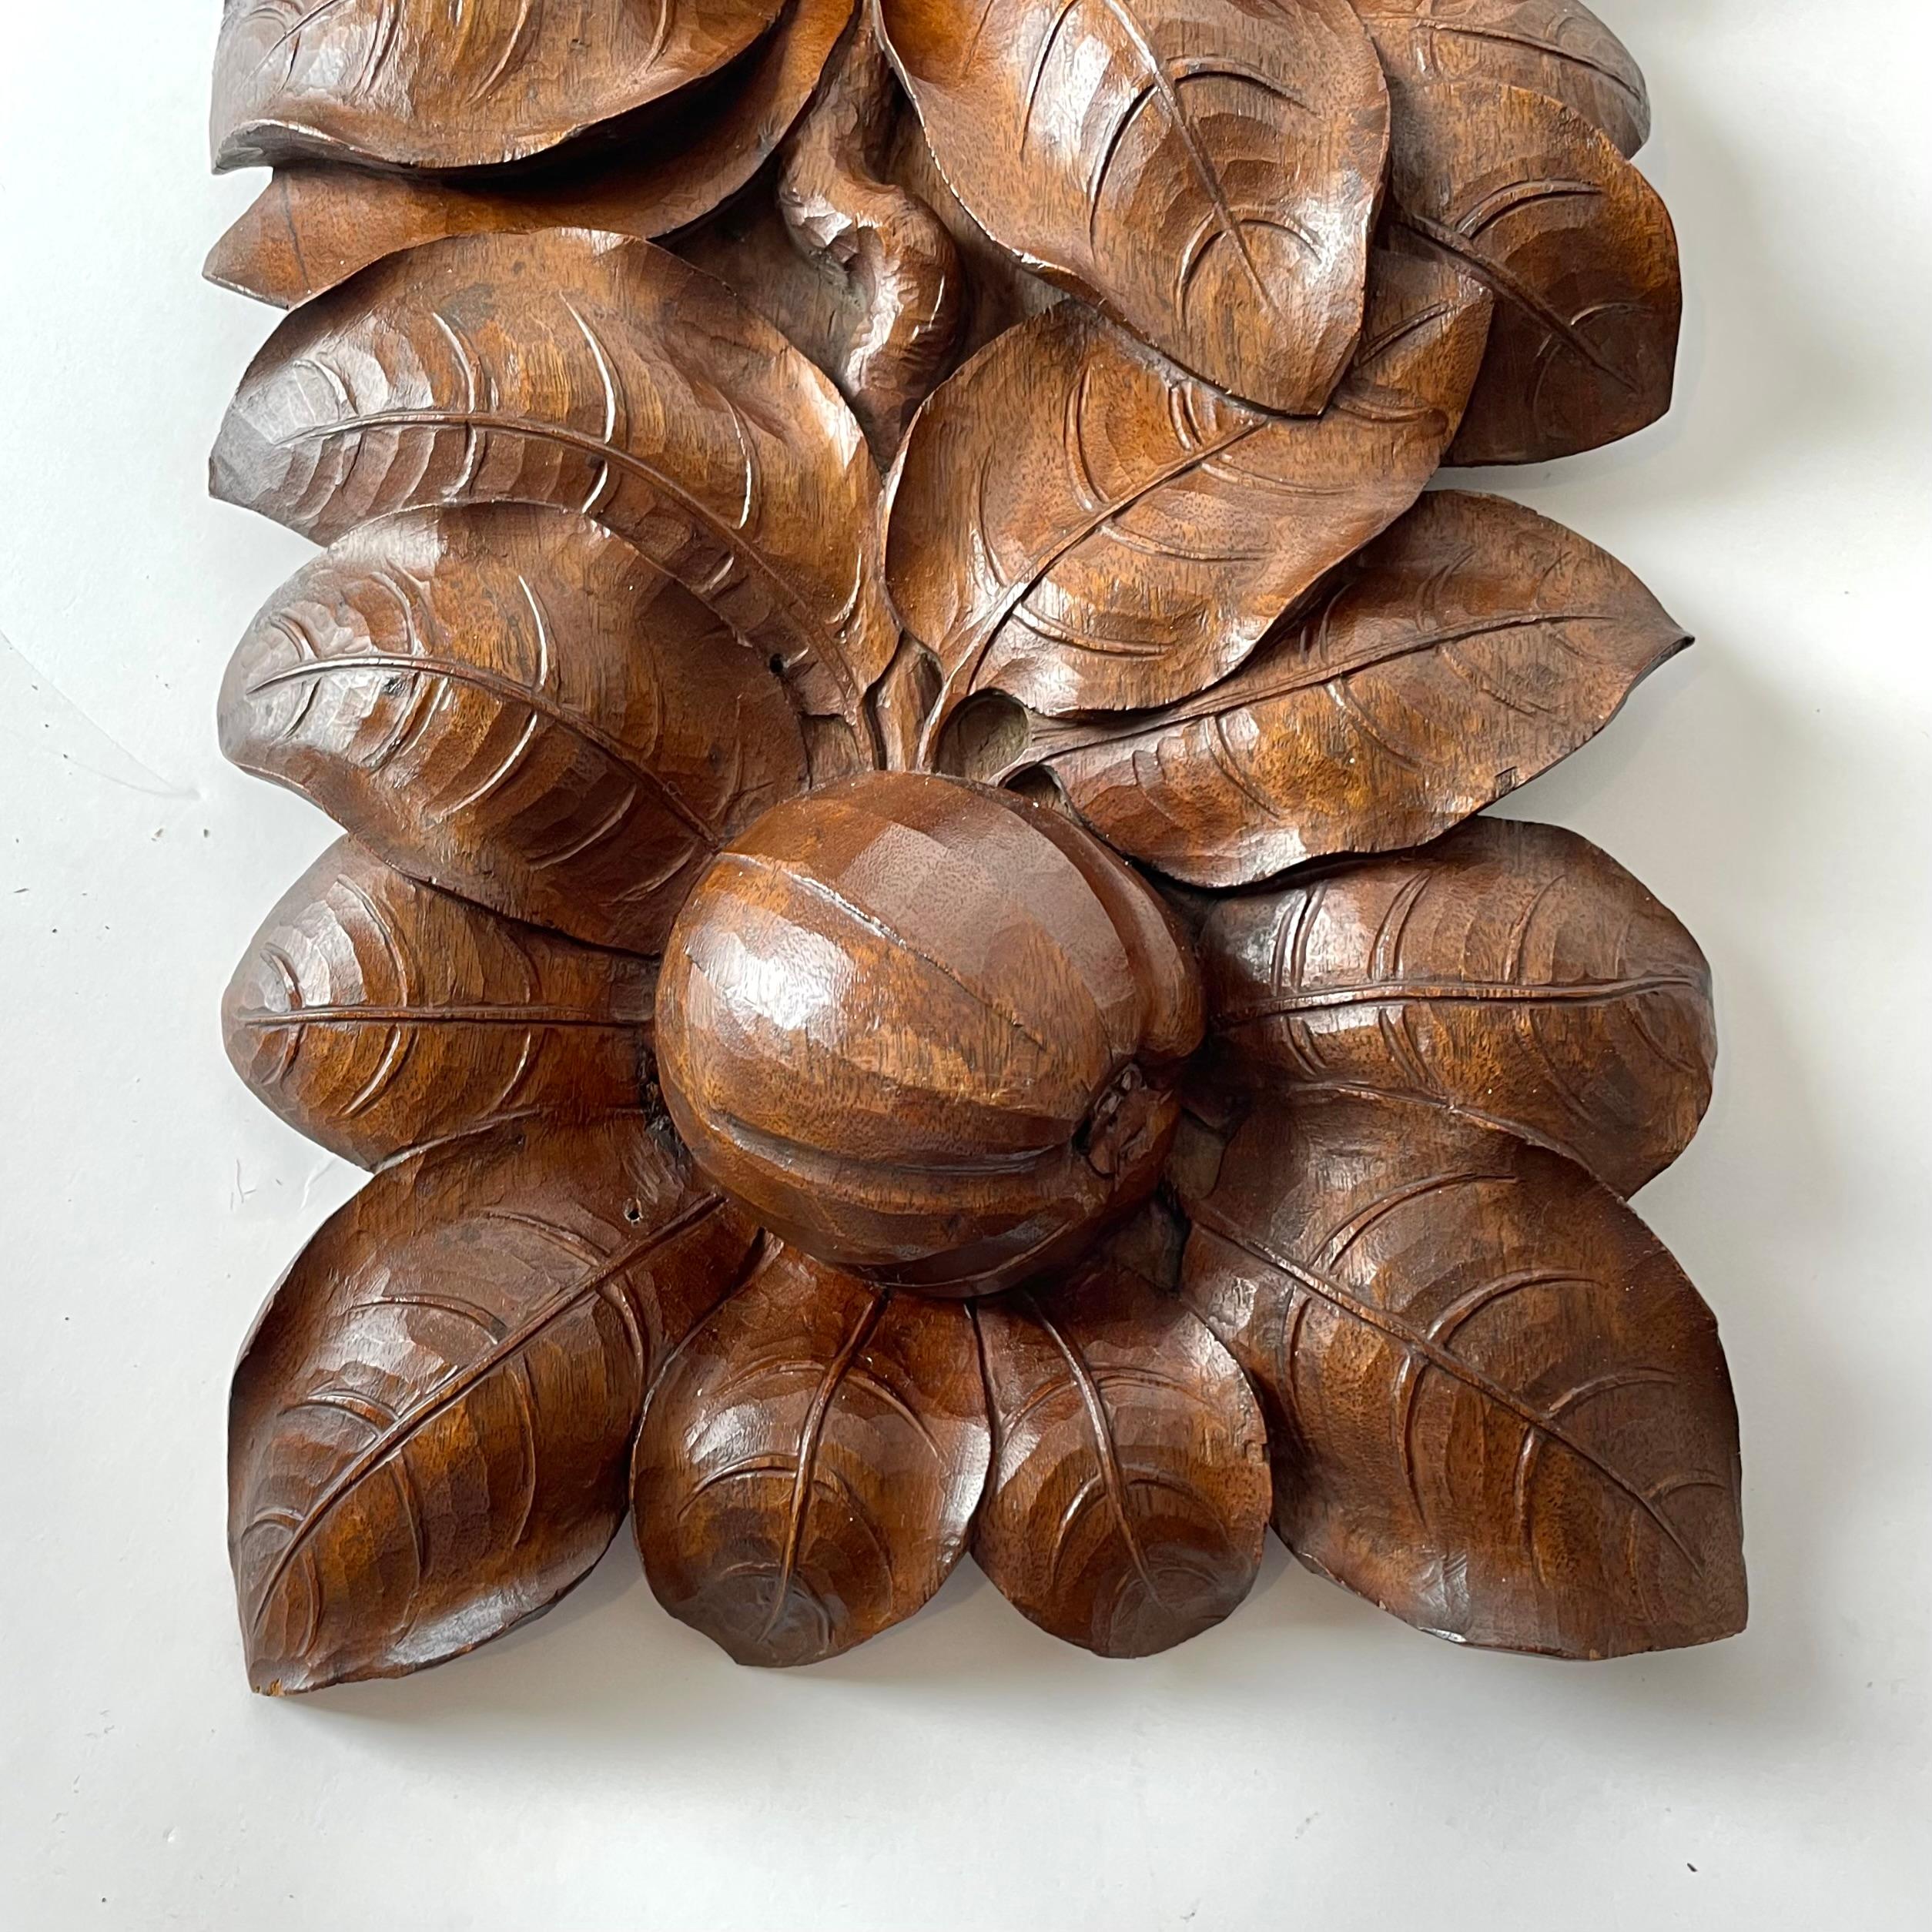 Walnut Woodcarved Decorative Element Depicting Apples Foliage Early 20th Century For Sale 2